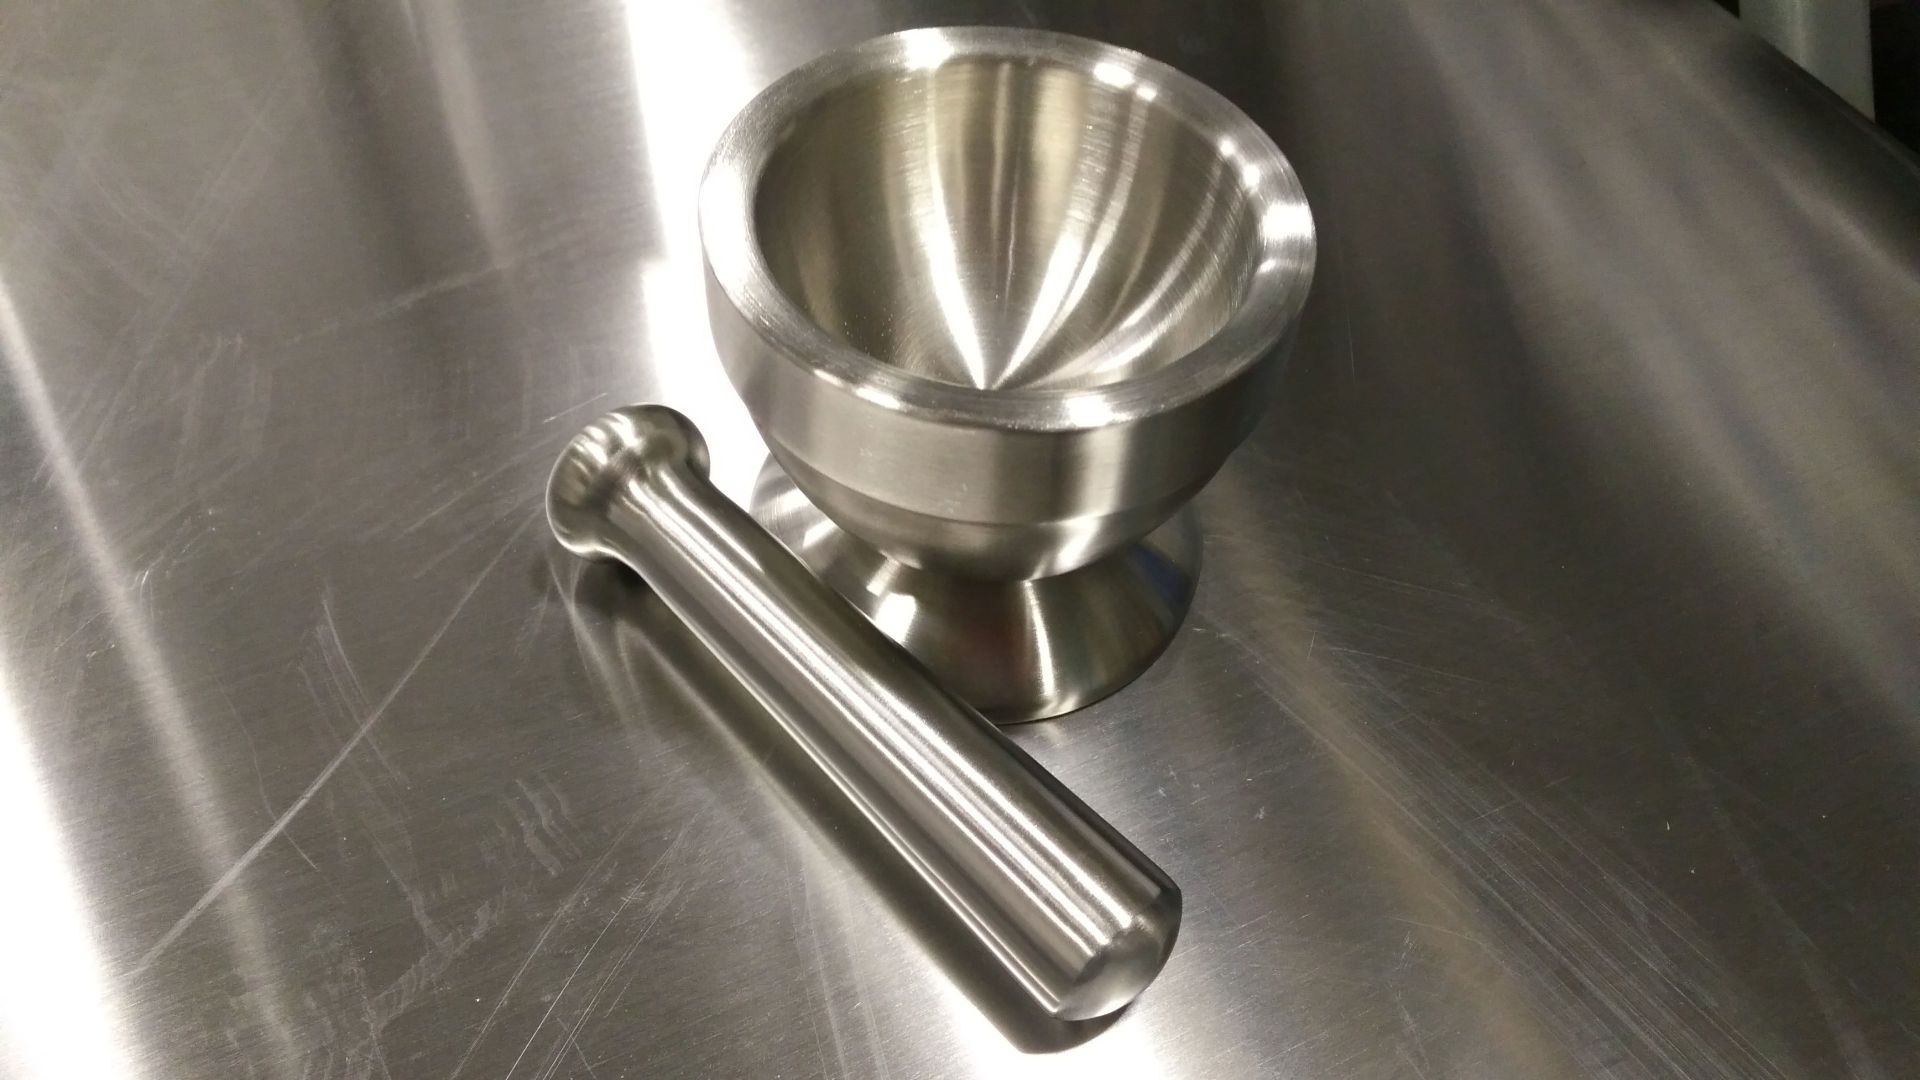 Stainless Steel Mortar and Pestle, Amco 8395 - Image 2 of 2